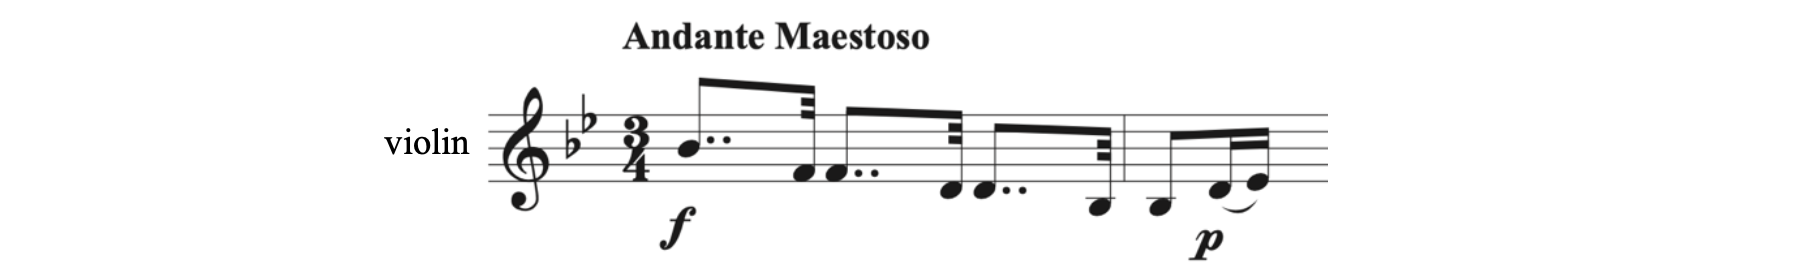 Double dotted notes in Park, Violin Sonata, Op. 13, No. 1, first movement - Andante Maestoso. The first measure begins with three pairs of a double dotted eighth note beamed to a thirty-second note.